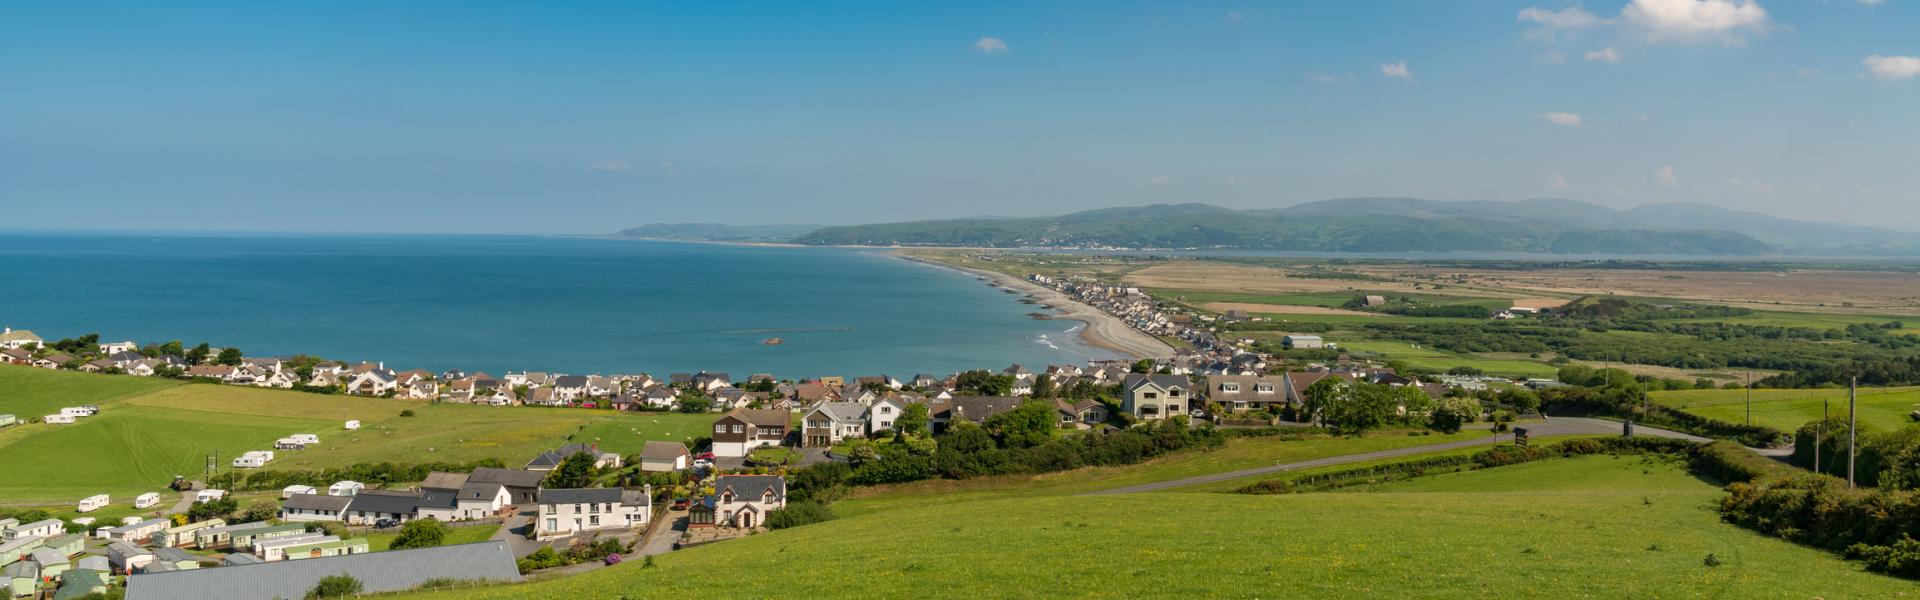 Holiday lettings & accommodation in Borth - HomeToGo